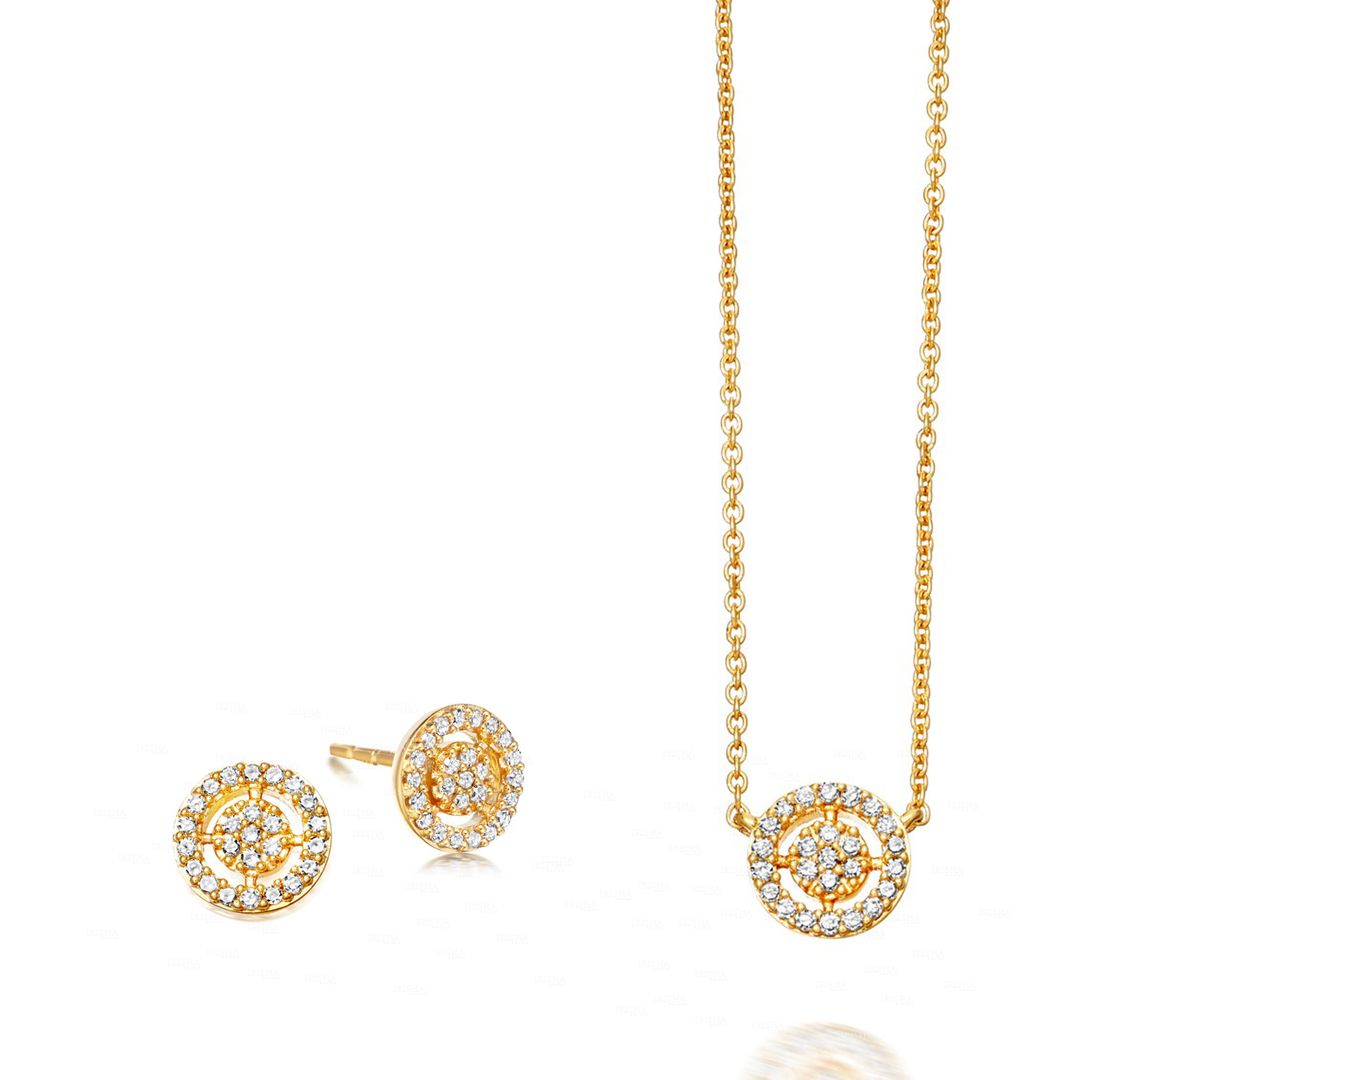 Genuine Diamond Concentric Circle Design Earrings Necklace 14K Gold Jewelry Set